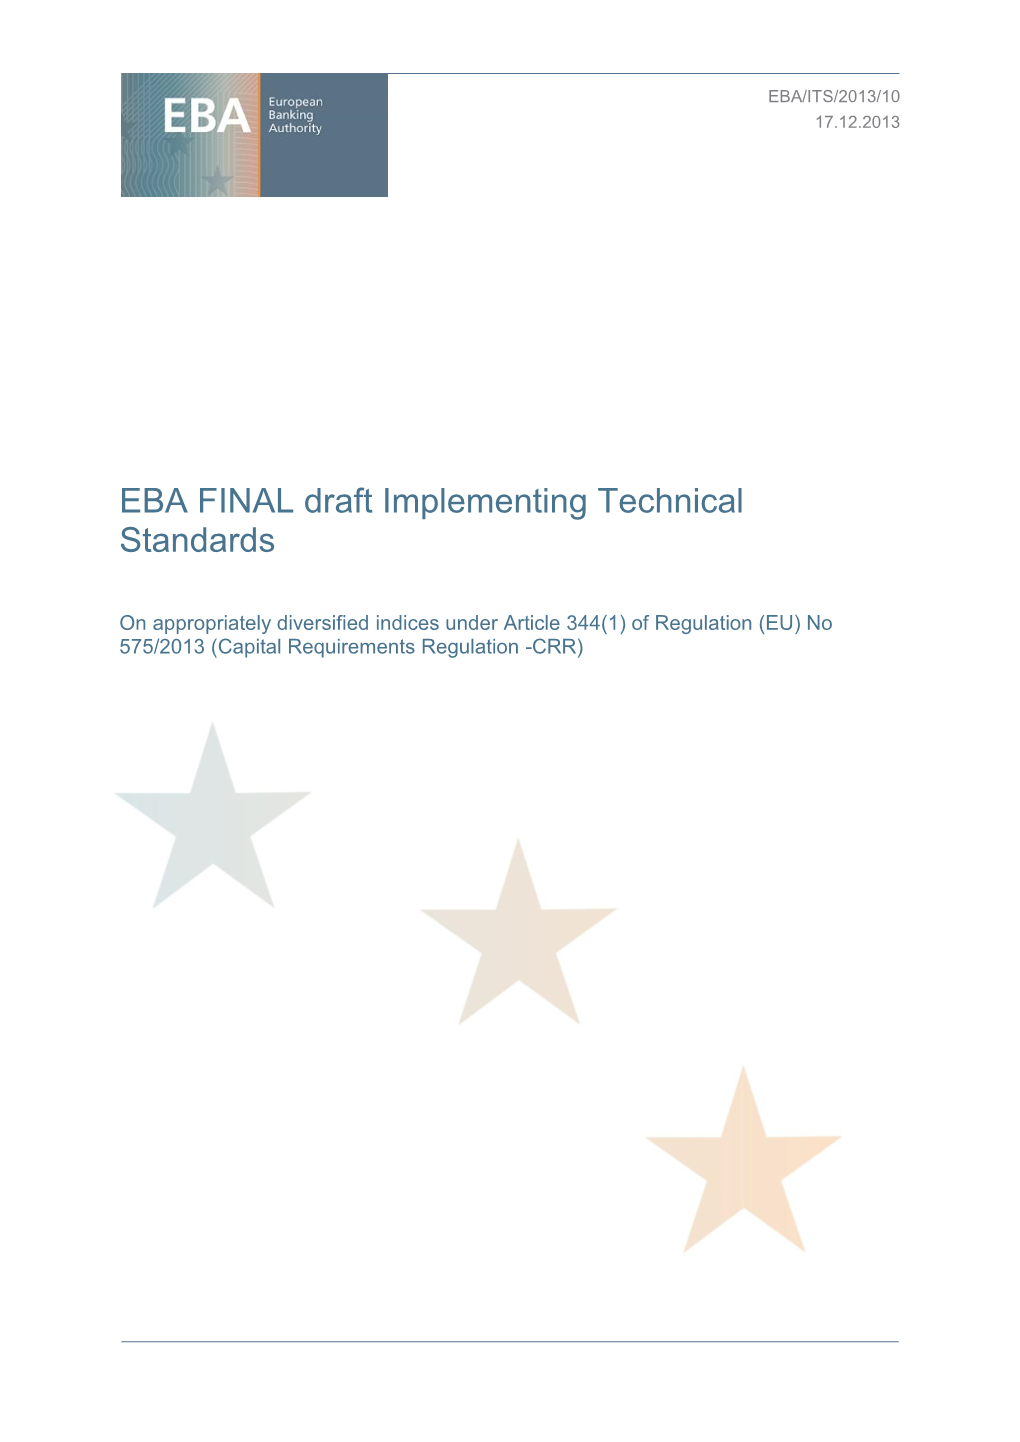 EBA Final Draft Implementing Technical Standards on Appropriately Diversified Indices Under Article 344(1)